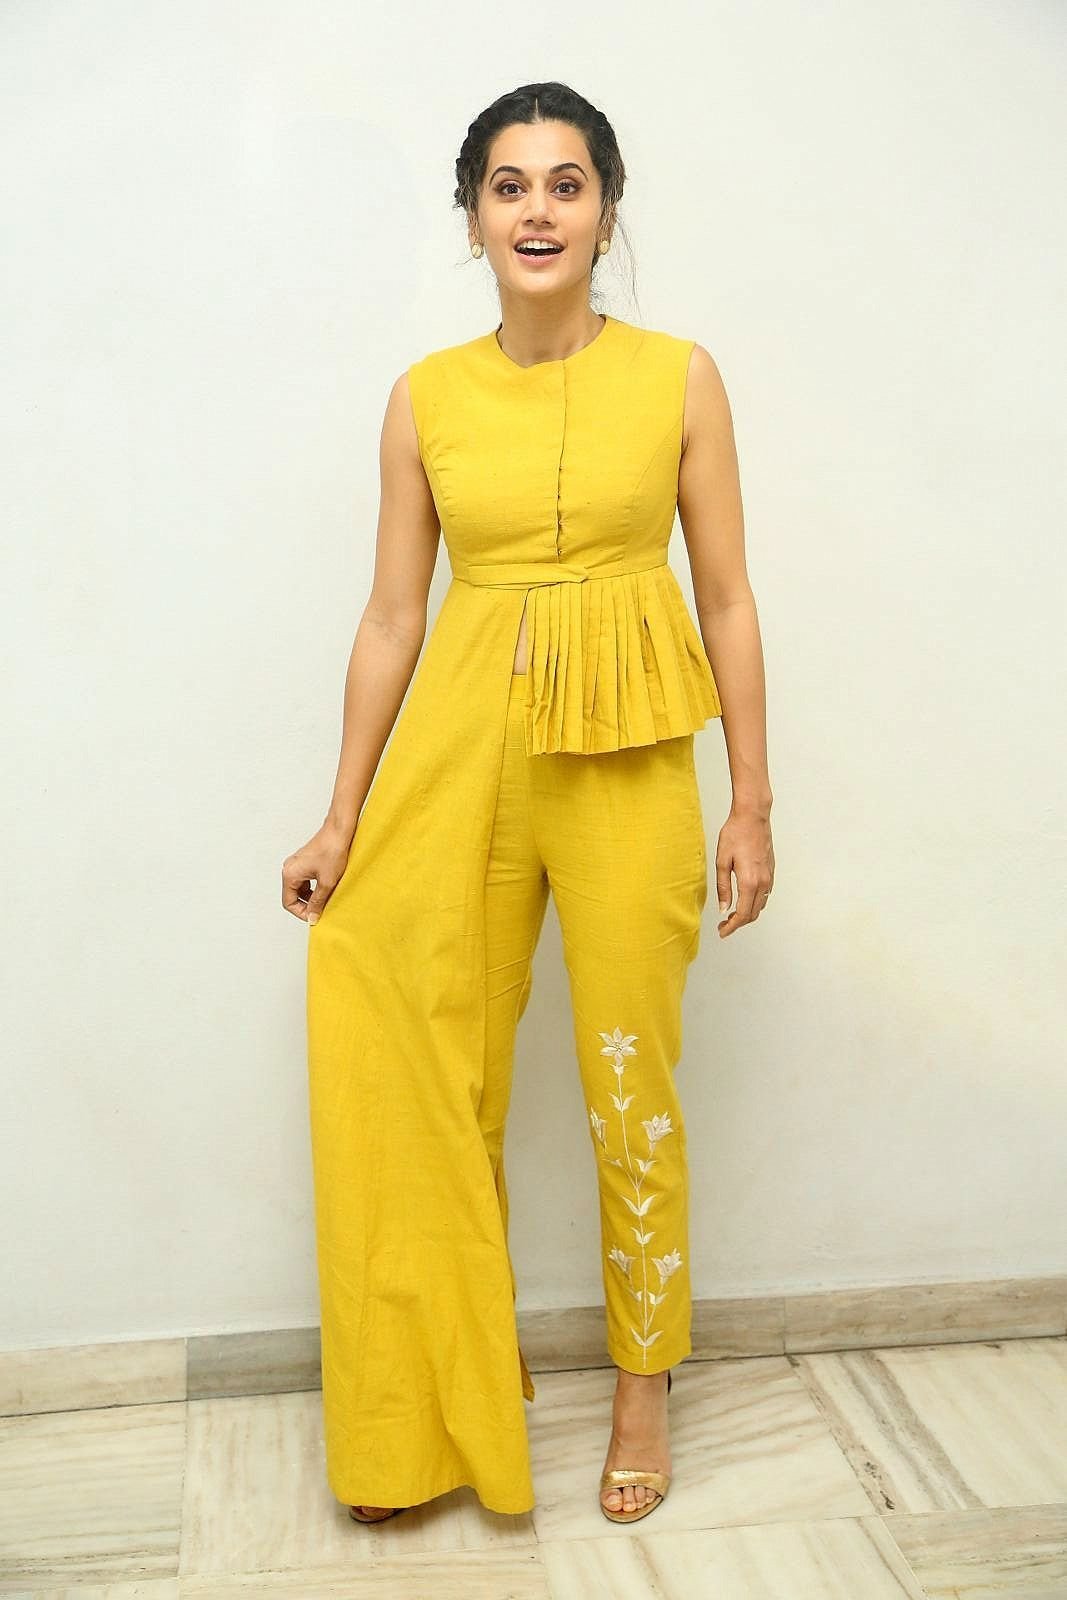 Taapsee Pannu at Anando Brahma Movie Motion Poster Launch Photos | Picture 1500583